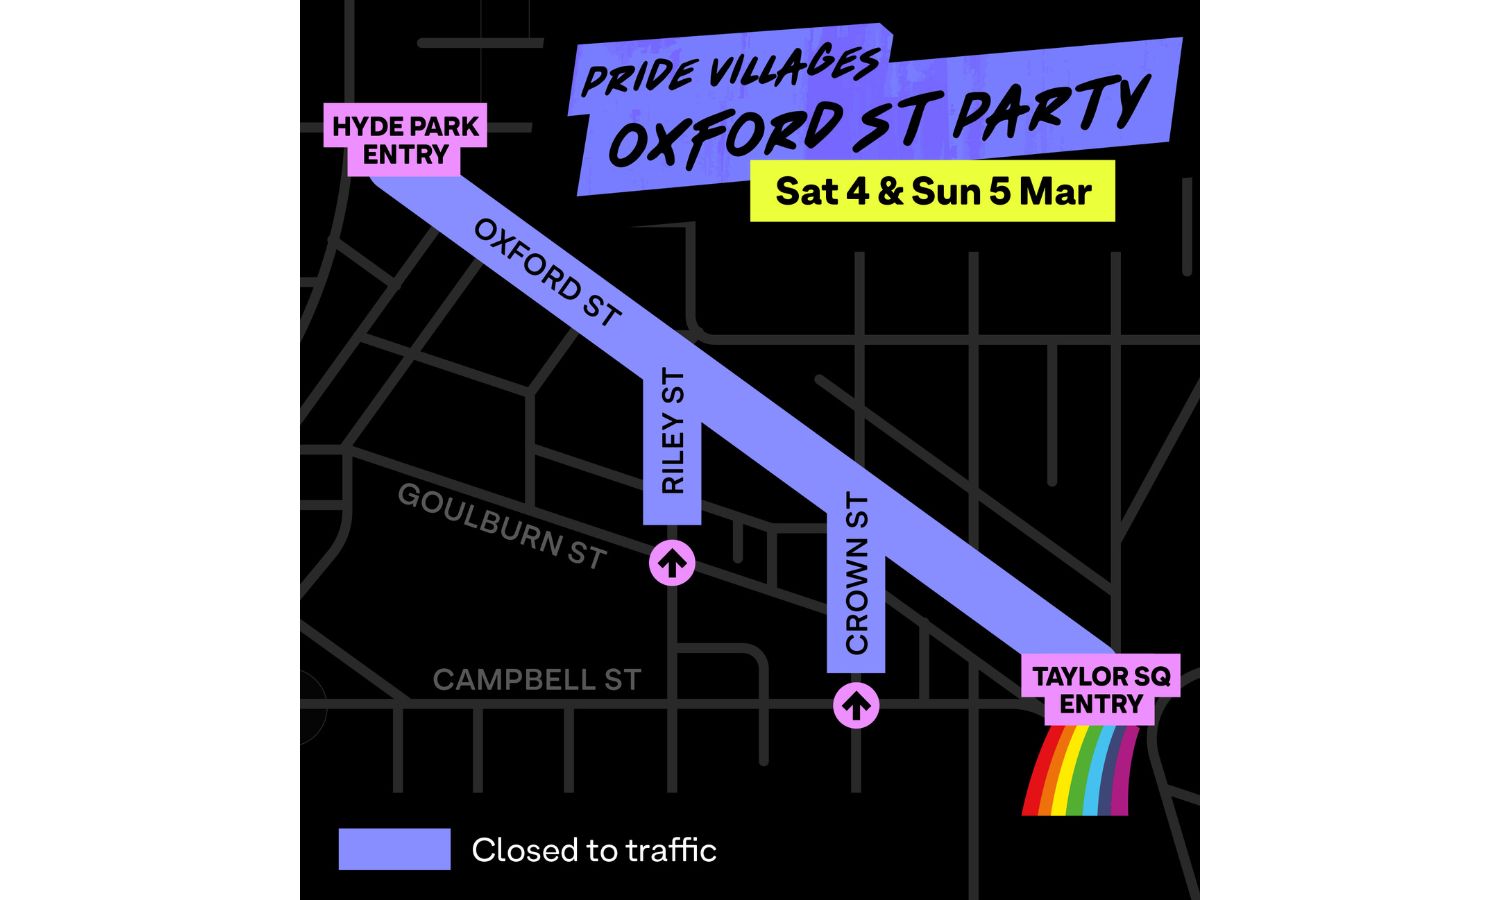 Oxford Street WorldPride party